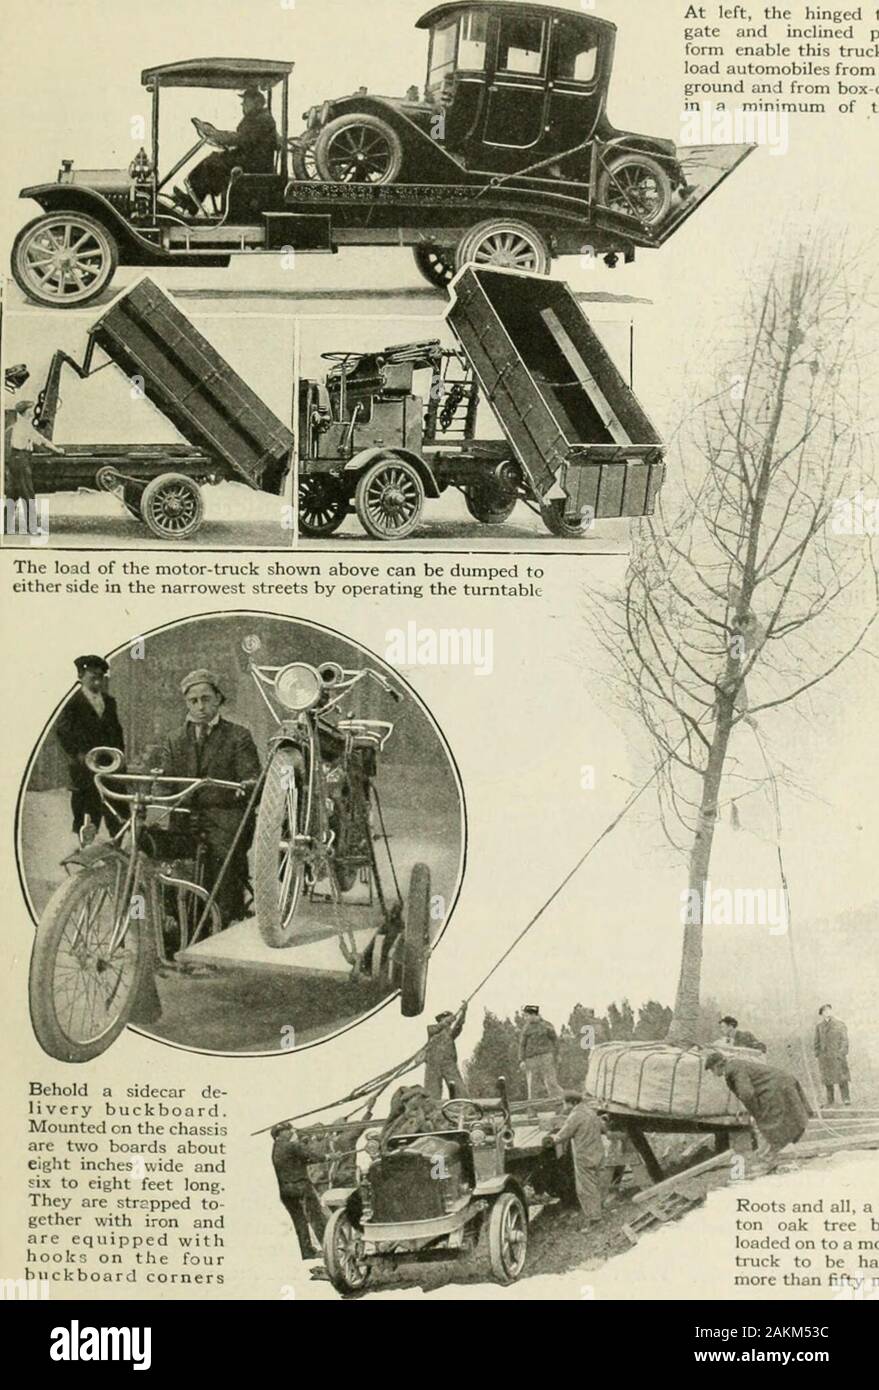 Popular science monthly . 188 and in Their Accessories At left, the hinged tail-gate and indincd plat-form enable this truck toload automobiles from theground and from box-carsin a minimum of time. Behold a sidecar de-livery buckboard.Mounted on the chasEisare two boards abouteight inches wide andsix to eight feet long.They are stropped to-gether with iron andare equipped withhook?; on the fourbuckboard corners Roots and all, a five-ton oak tree beingloaded on to a motor-truck to be hauledmore than fifty miles 189 If We Had Eyes Like Microscopes By Edward F. Bigelow CERTAIN writers, chiefly De Stock Photo